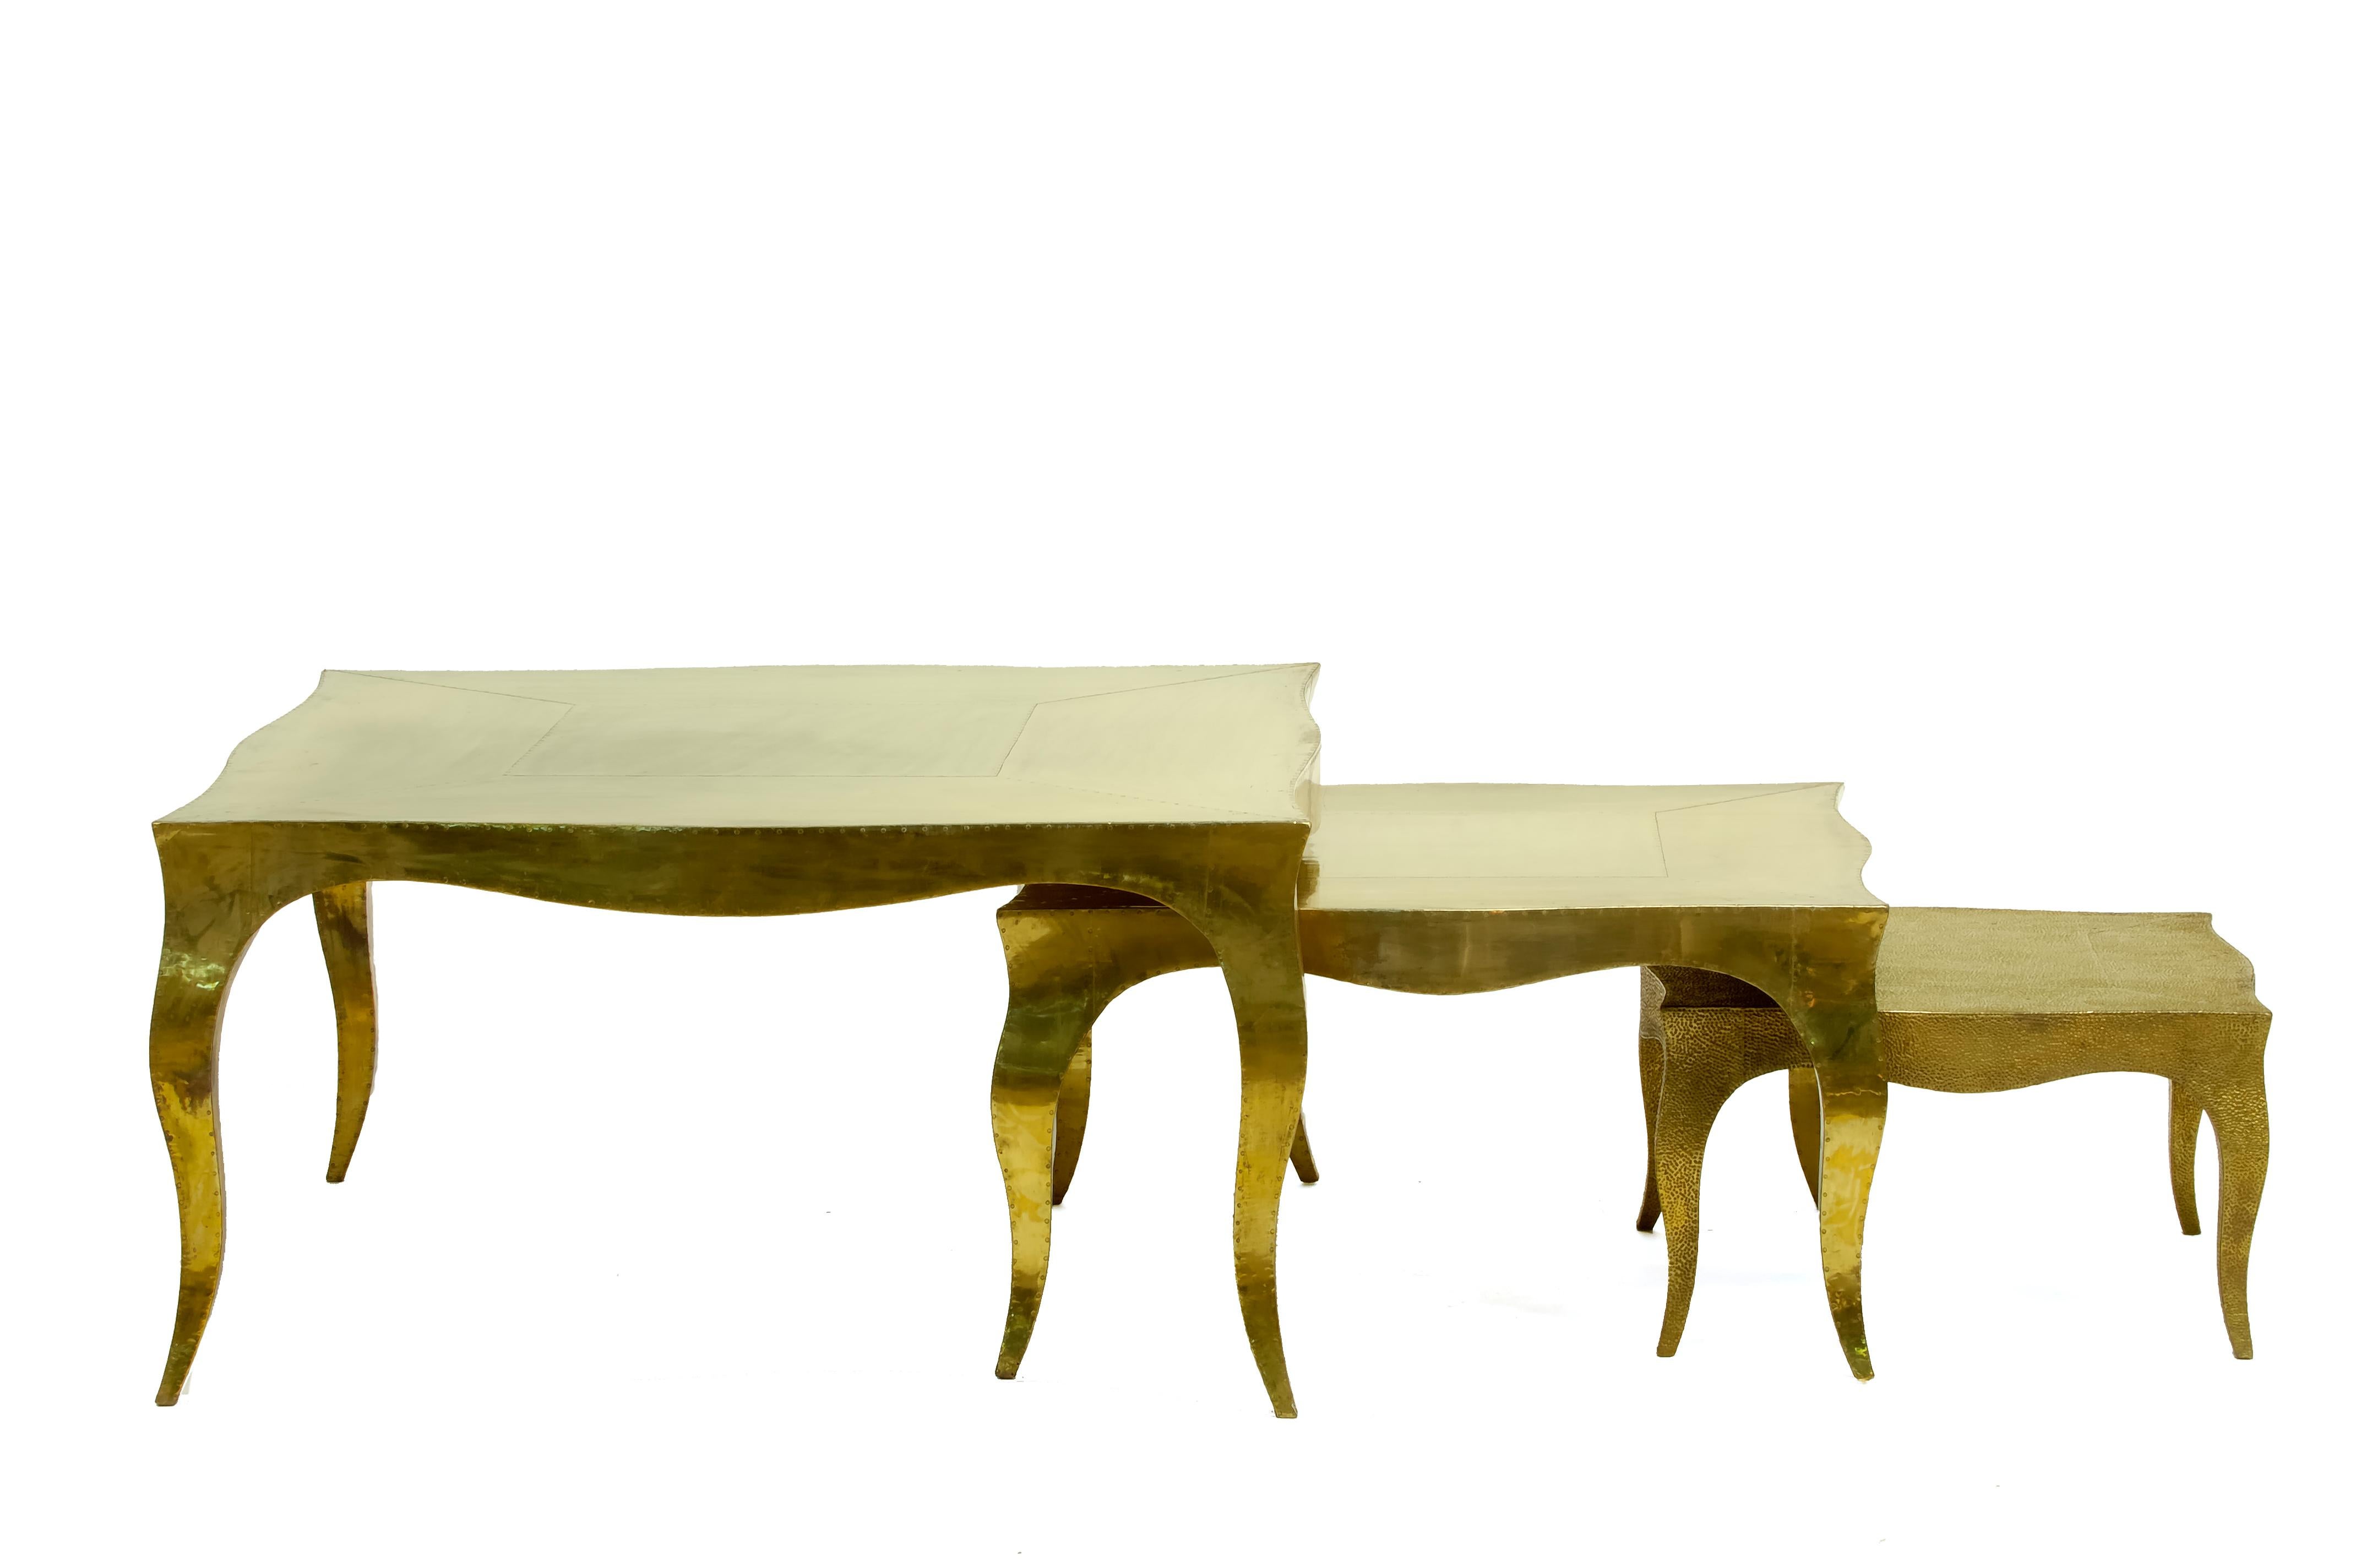 Louise Art Deco Nesting Tables Smooth Brass 18.5x18.5x10 inch by Paul M. en vente 9